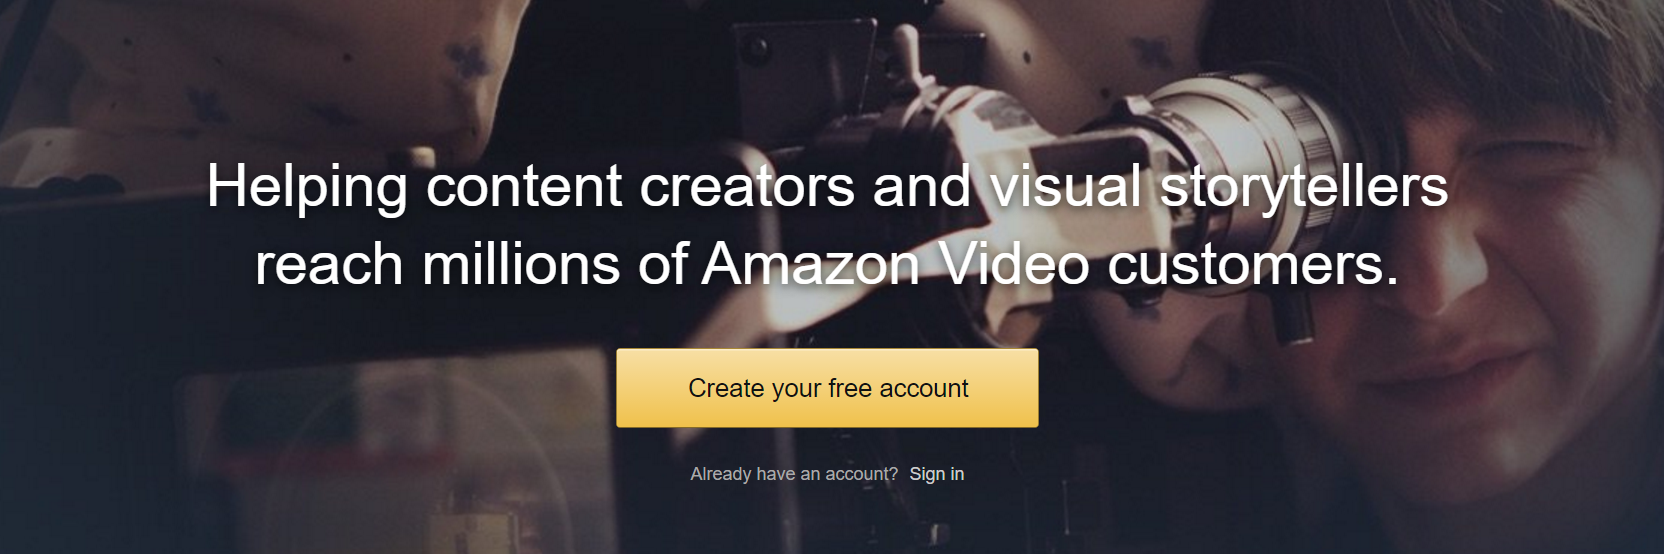 Amazon’s New ‘Video Direct’ Rivals YouTube As A User-Generated Video Platform